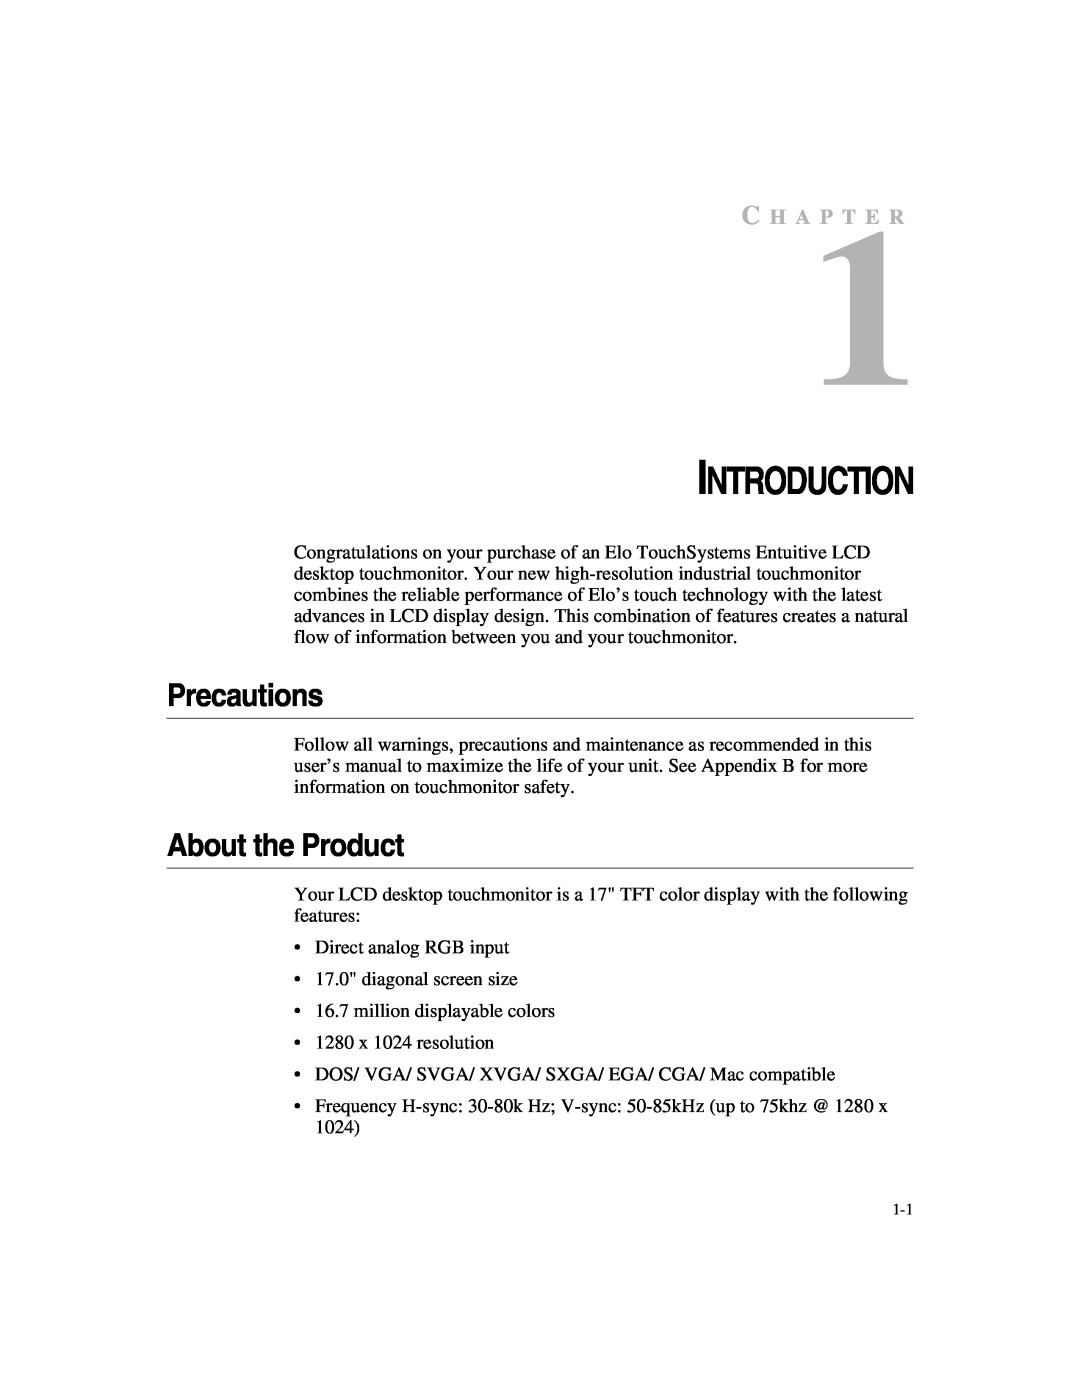 Elo TouchSystems 1725L Series manual Precautions, About the Product, C H A P T E R, Introduction 